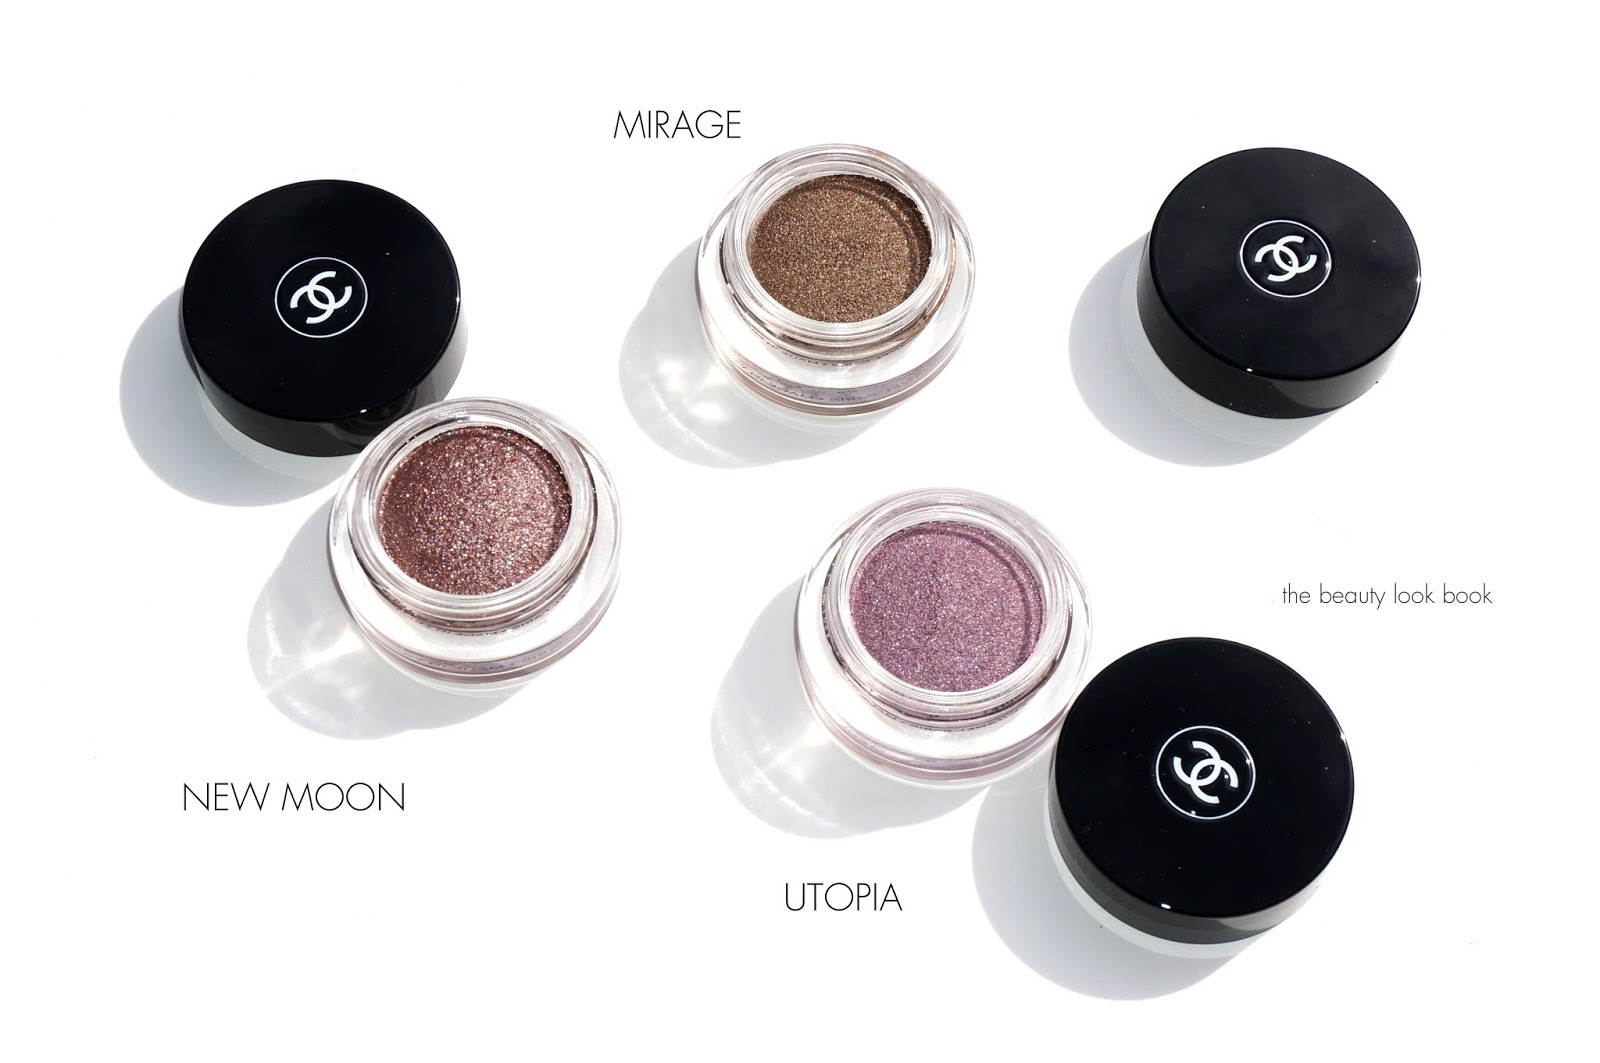 Chanel Illusion D'Ombre Mirage, New Moon and Utopia - The Beauty